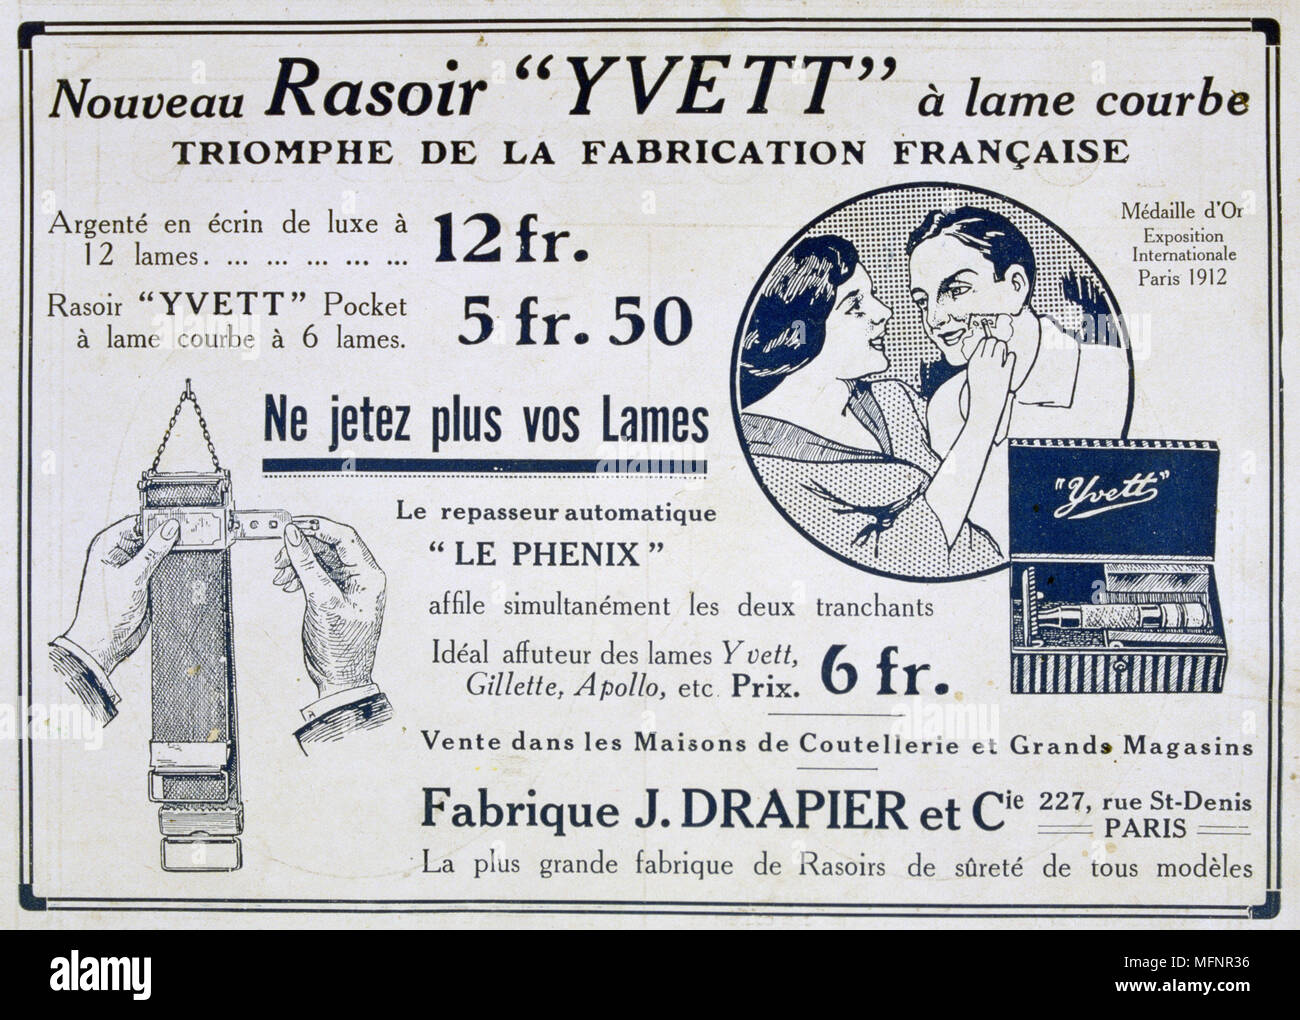 Advertisement for the Yvett pocket razor and a strop for sharpening razors.  From the French periodical 'Le Flambeau', 18 September 1915.  First World War 1914-1918. Stock Photo